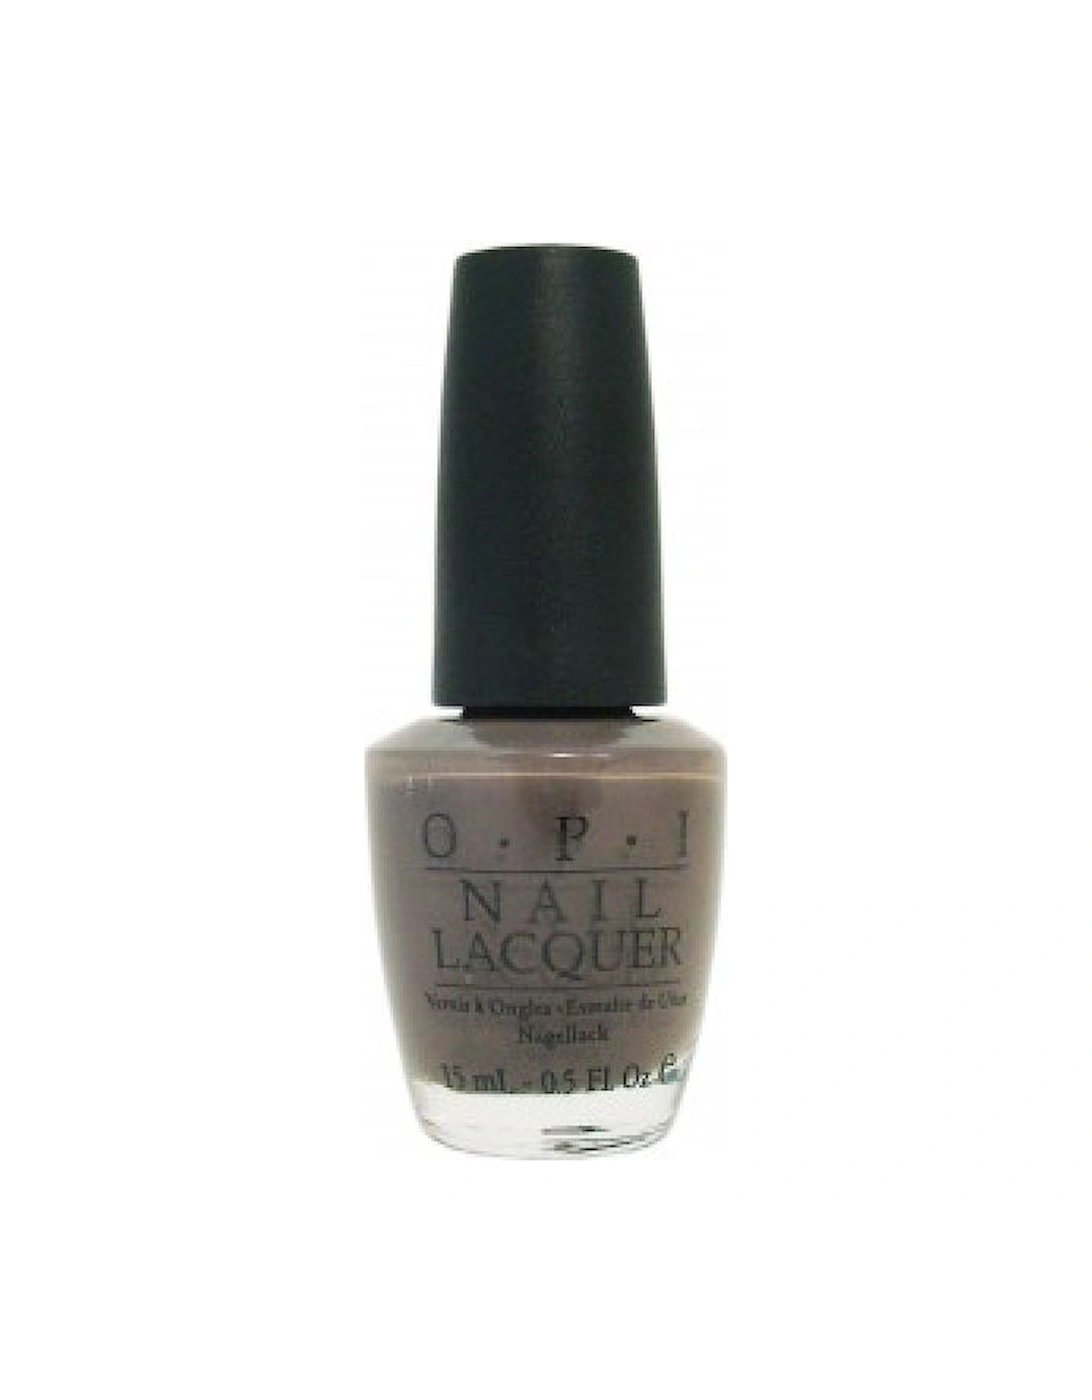 Nail Varnish - You Don't Know Jacques! (15ml), 2 of 1